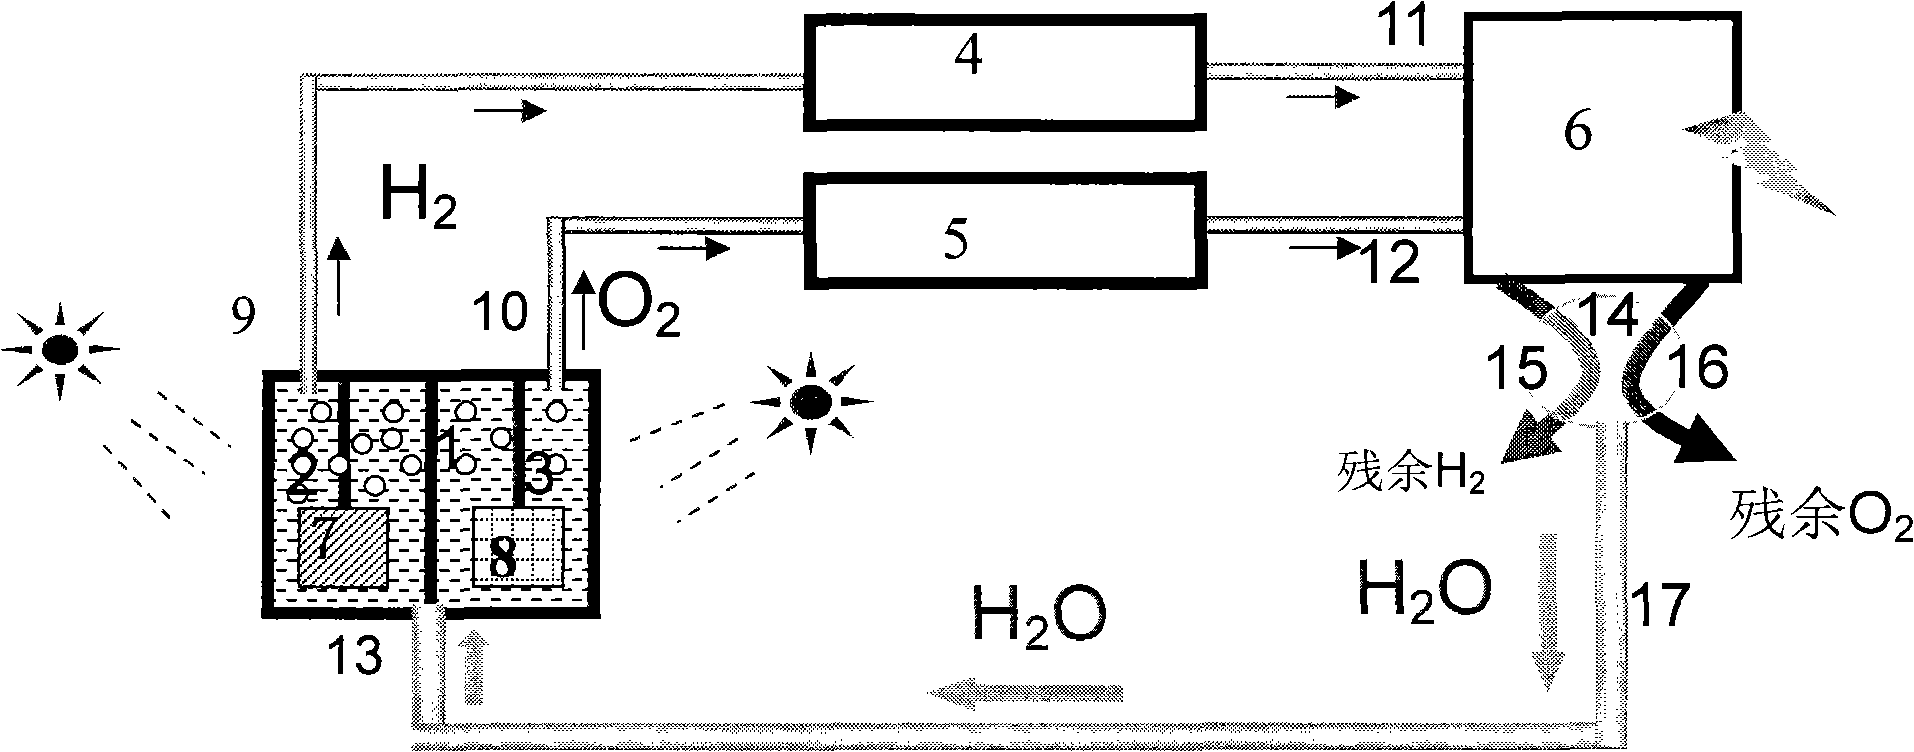 Solar energy storage system with coupled photo(electro)chemical cell and fuel cell